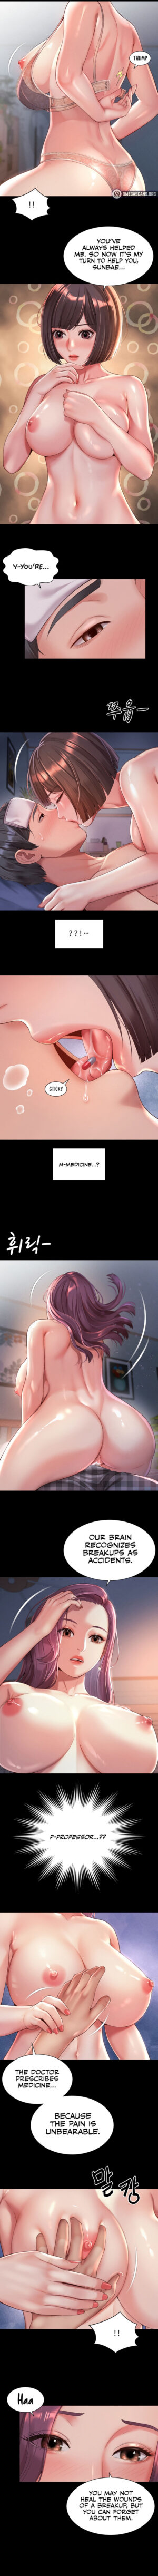 [Yoo Soyoung & Ryu Seungbae] The Player (1-9) [English] [Omega Scans] [Ongoing]